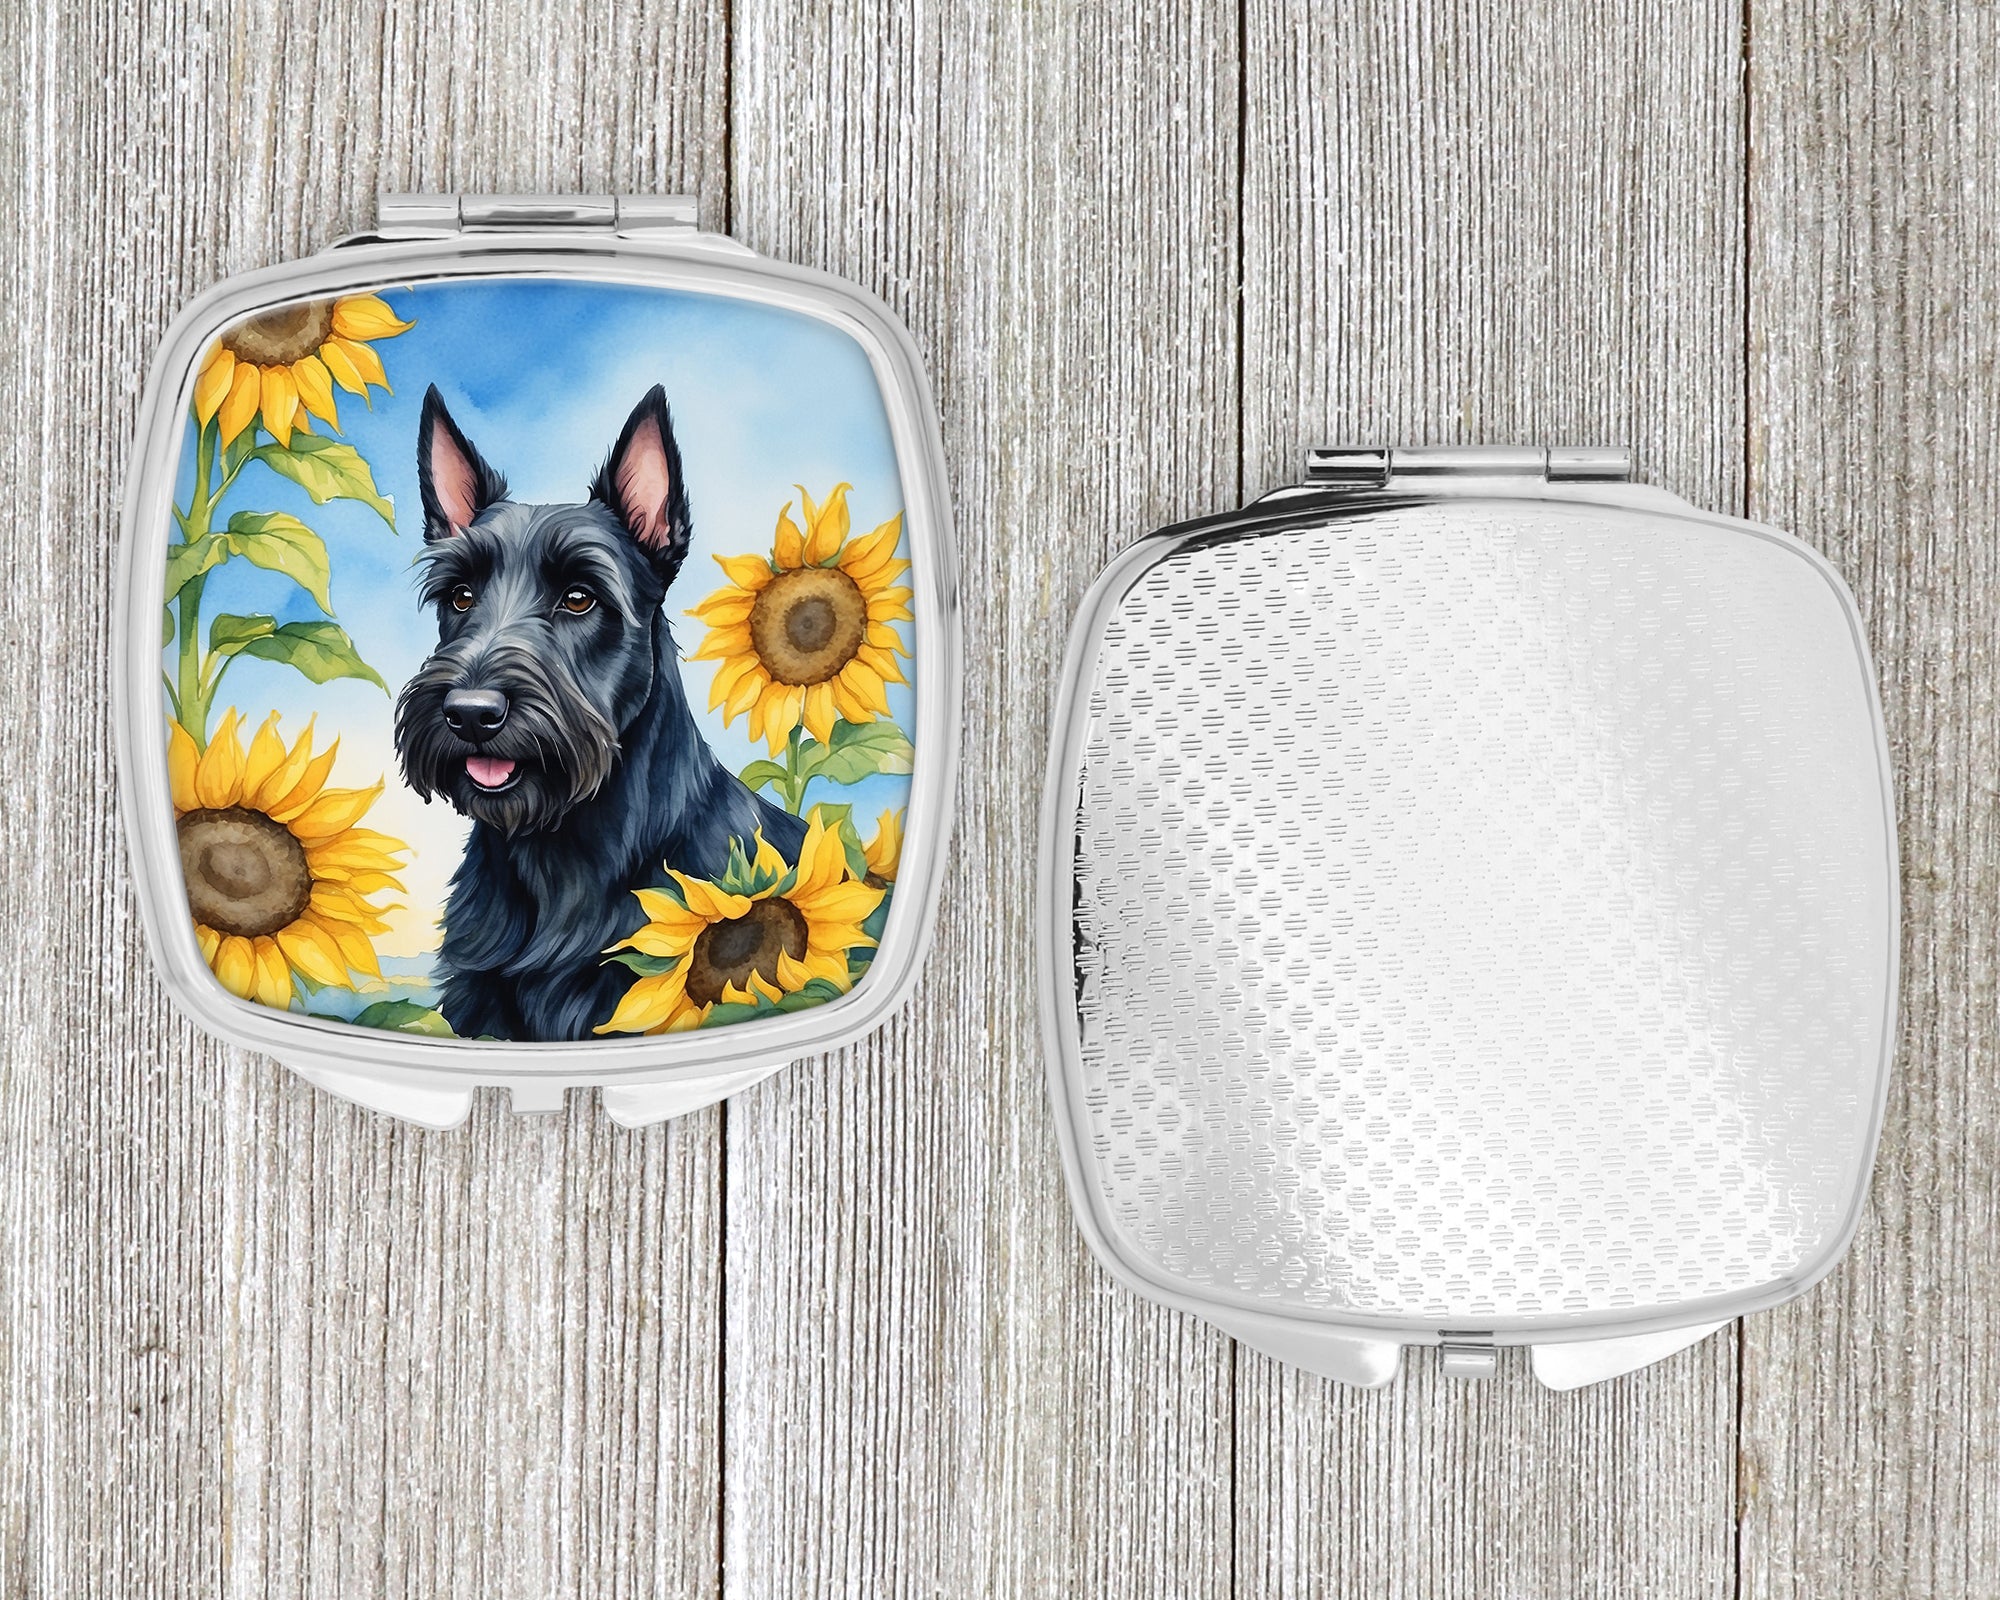 Scottish Terrier in Sunflowers Compact Mirror